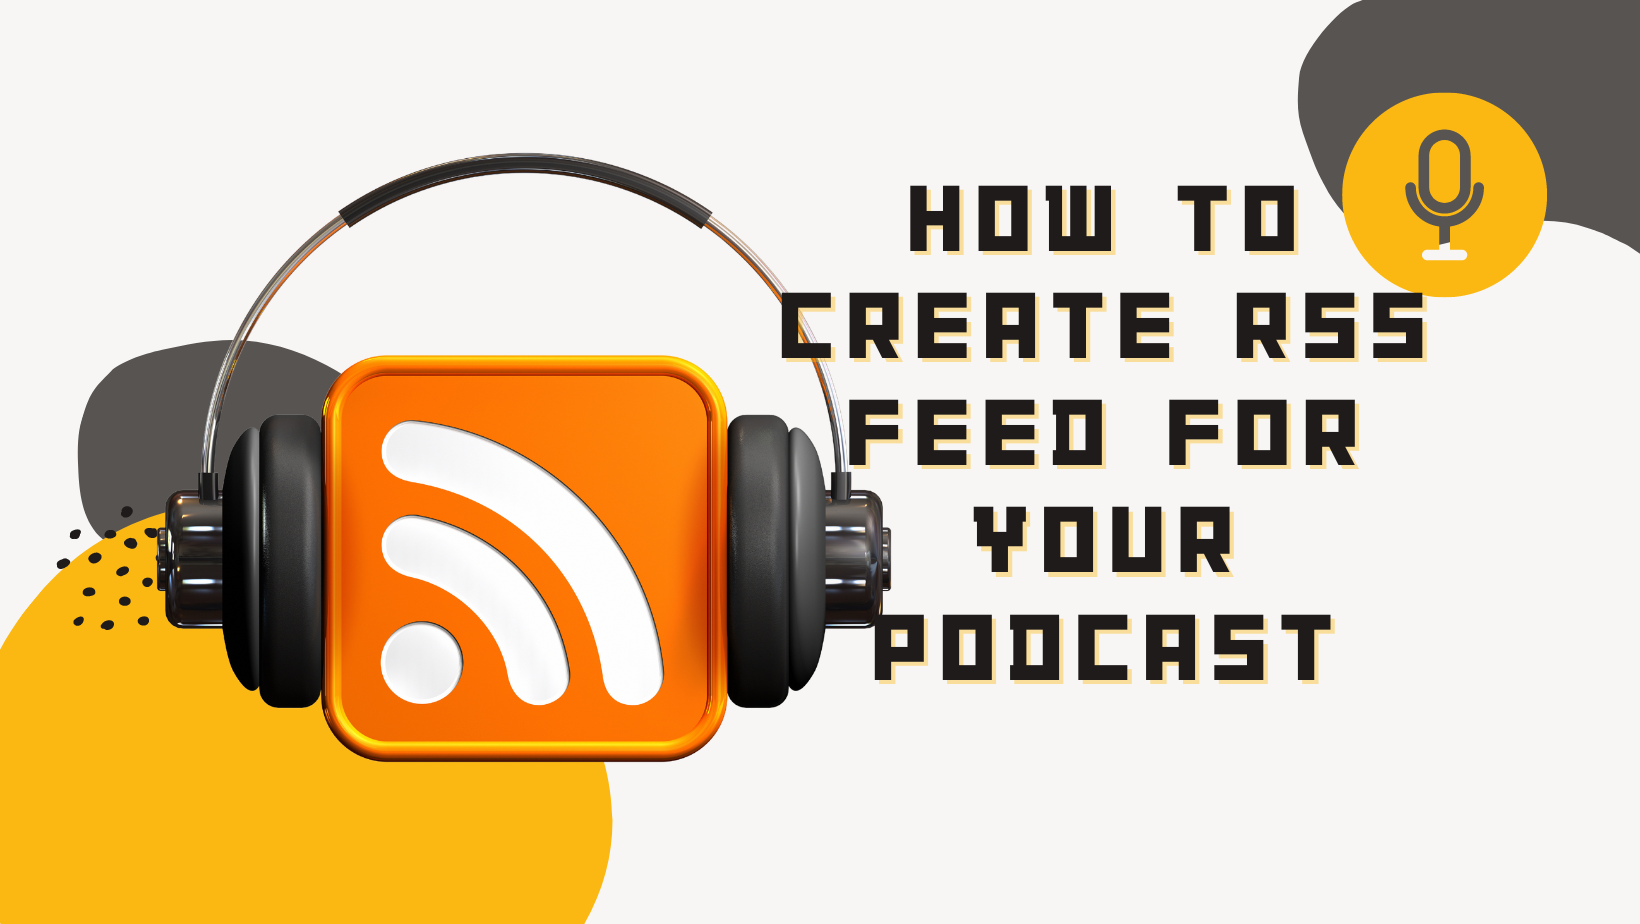 How to create rss feed for your podcast